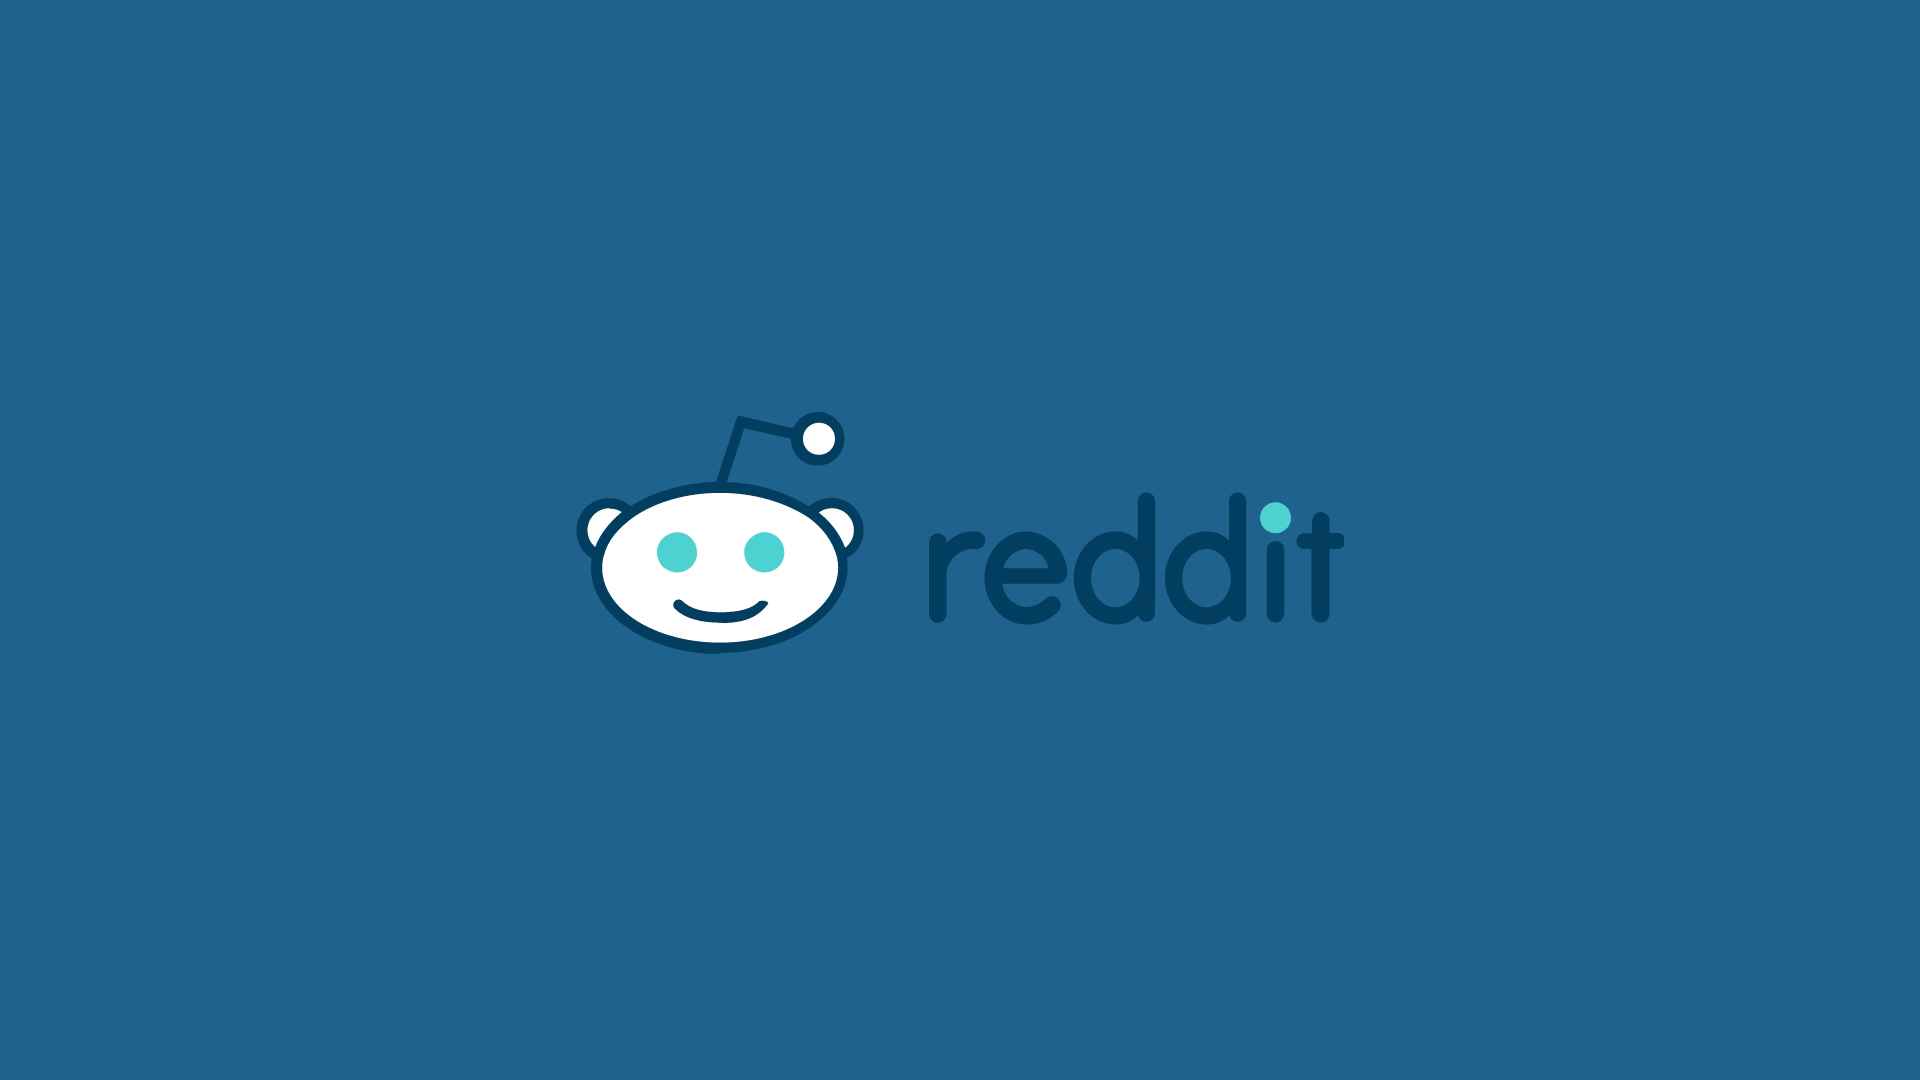 How can you access archived or older posts on Reddit?